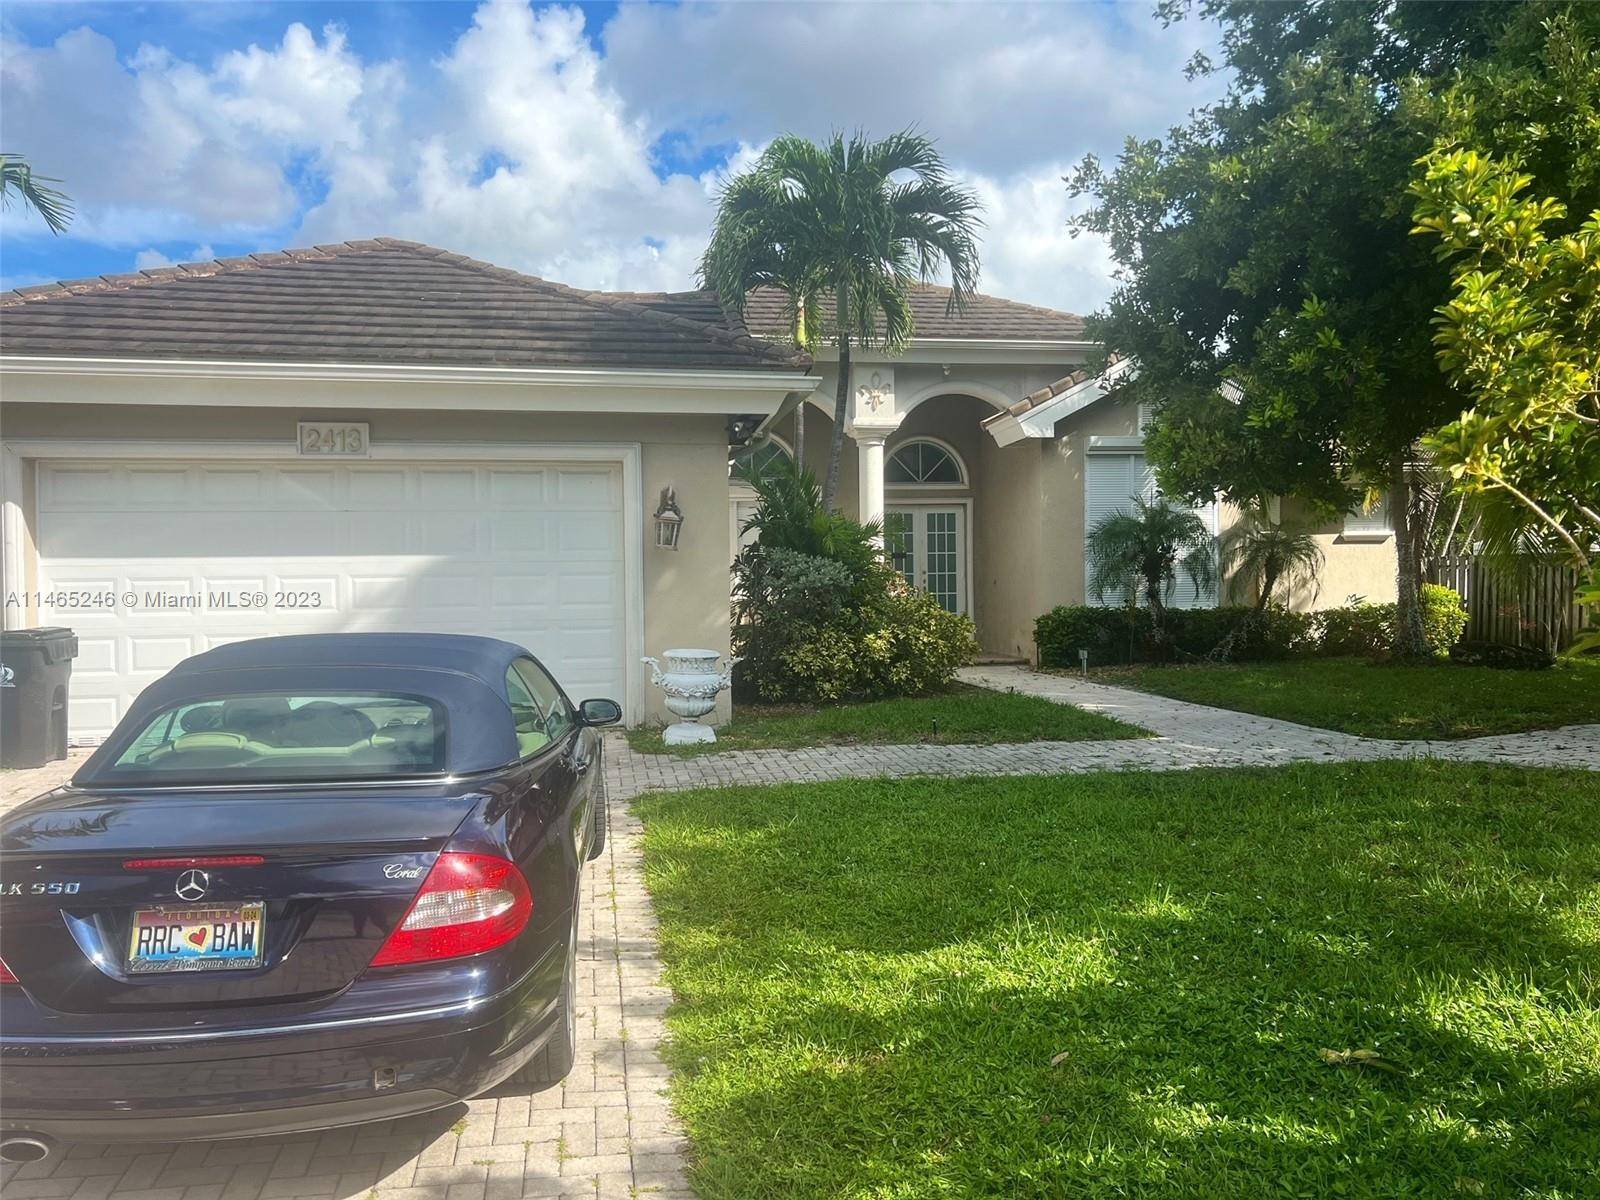 Welcome to this stunning single family residence in the prestigious Coral Ridge neighborhood.